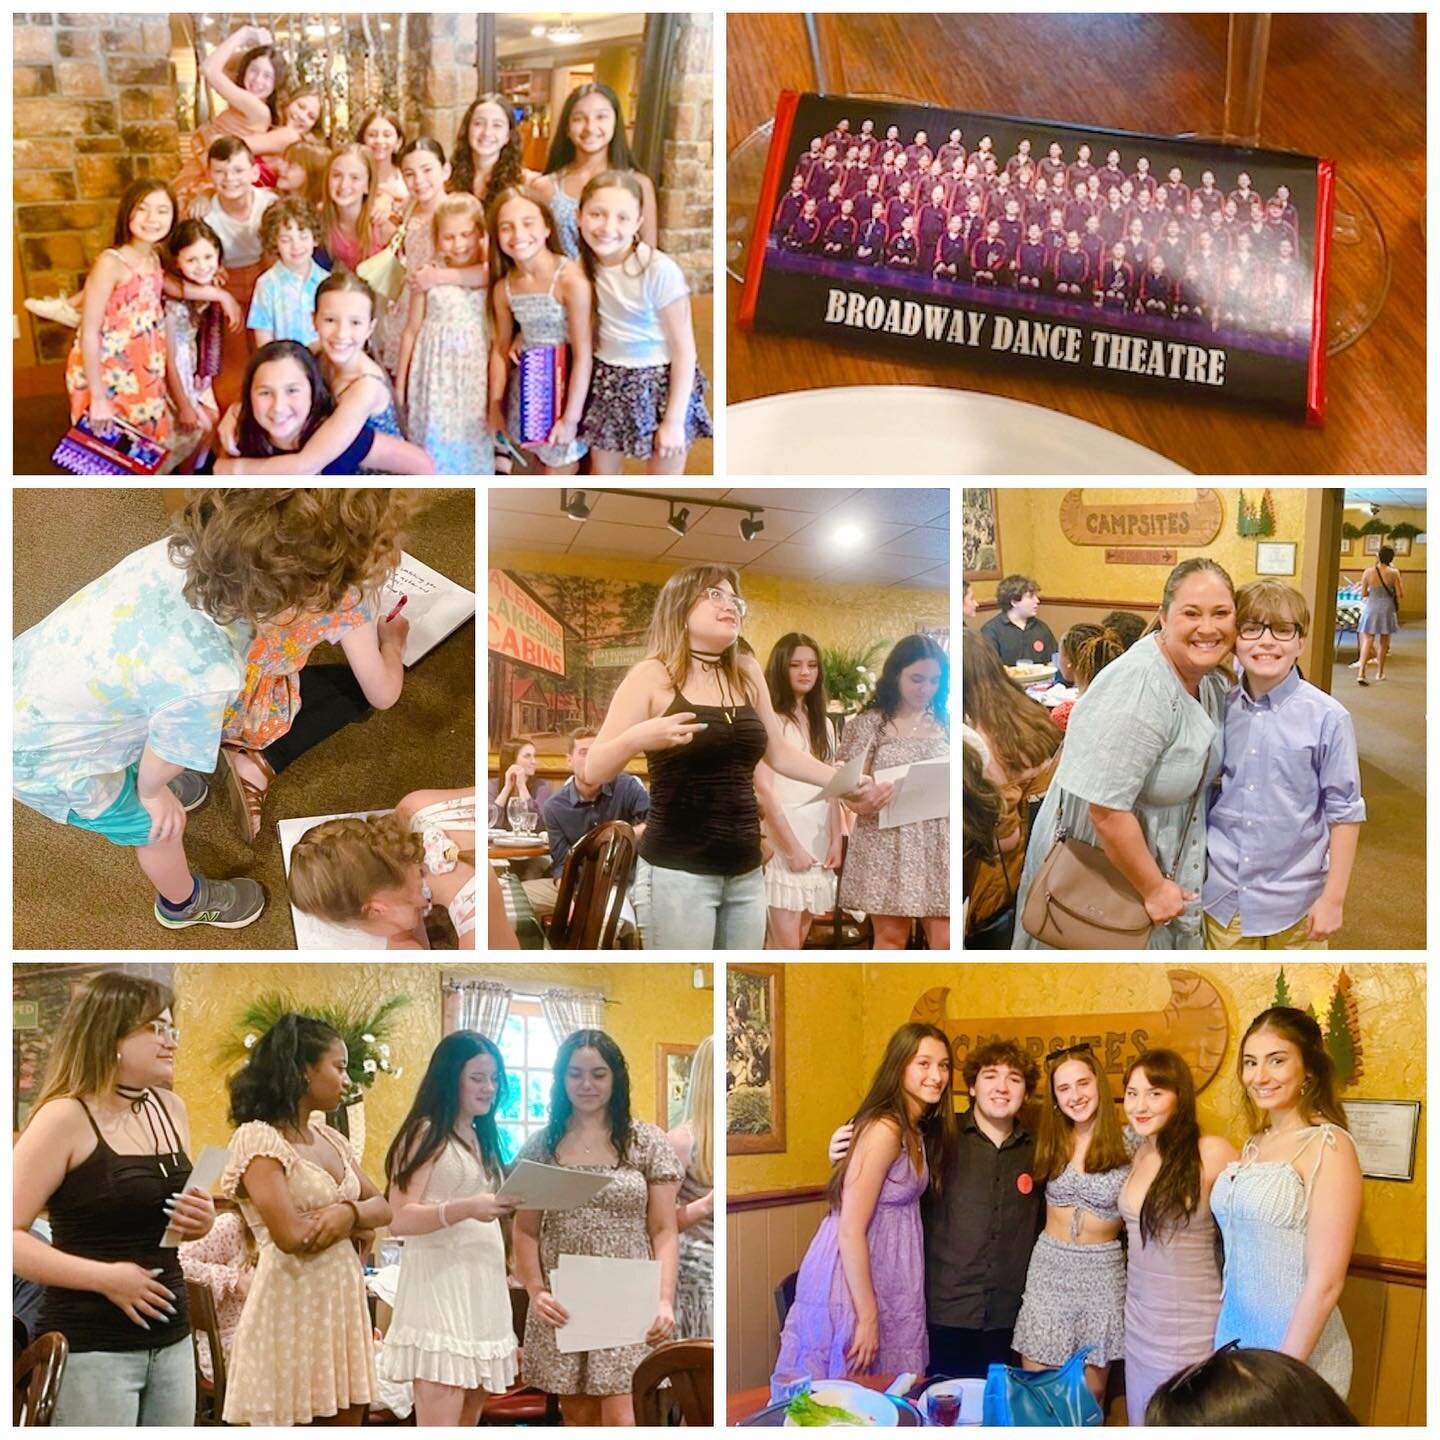 We ended our 25th Anniversary weekend with a fun &ldquo;Company Banquet!&rdquo; Dancers, parents, teachers, yearbooks, student awards, senior celebrations, pizza, alumni, and fun all around! #bdtfamily